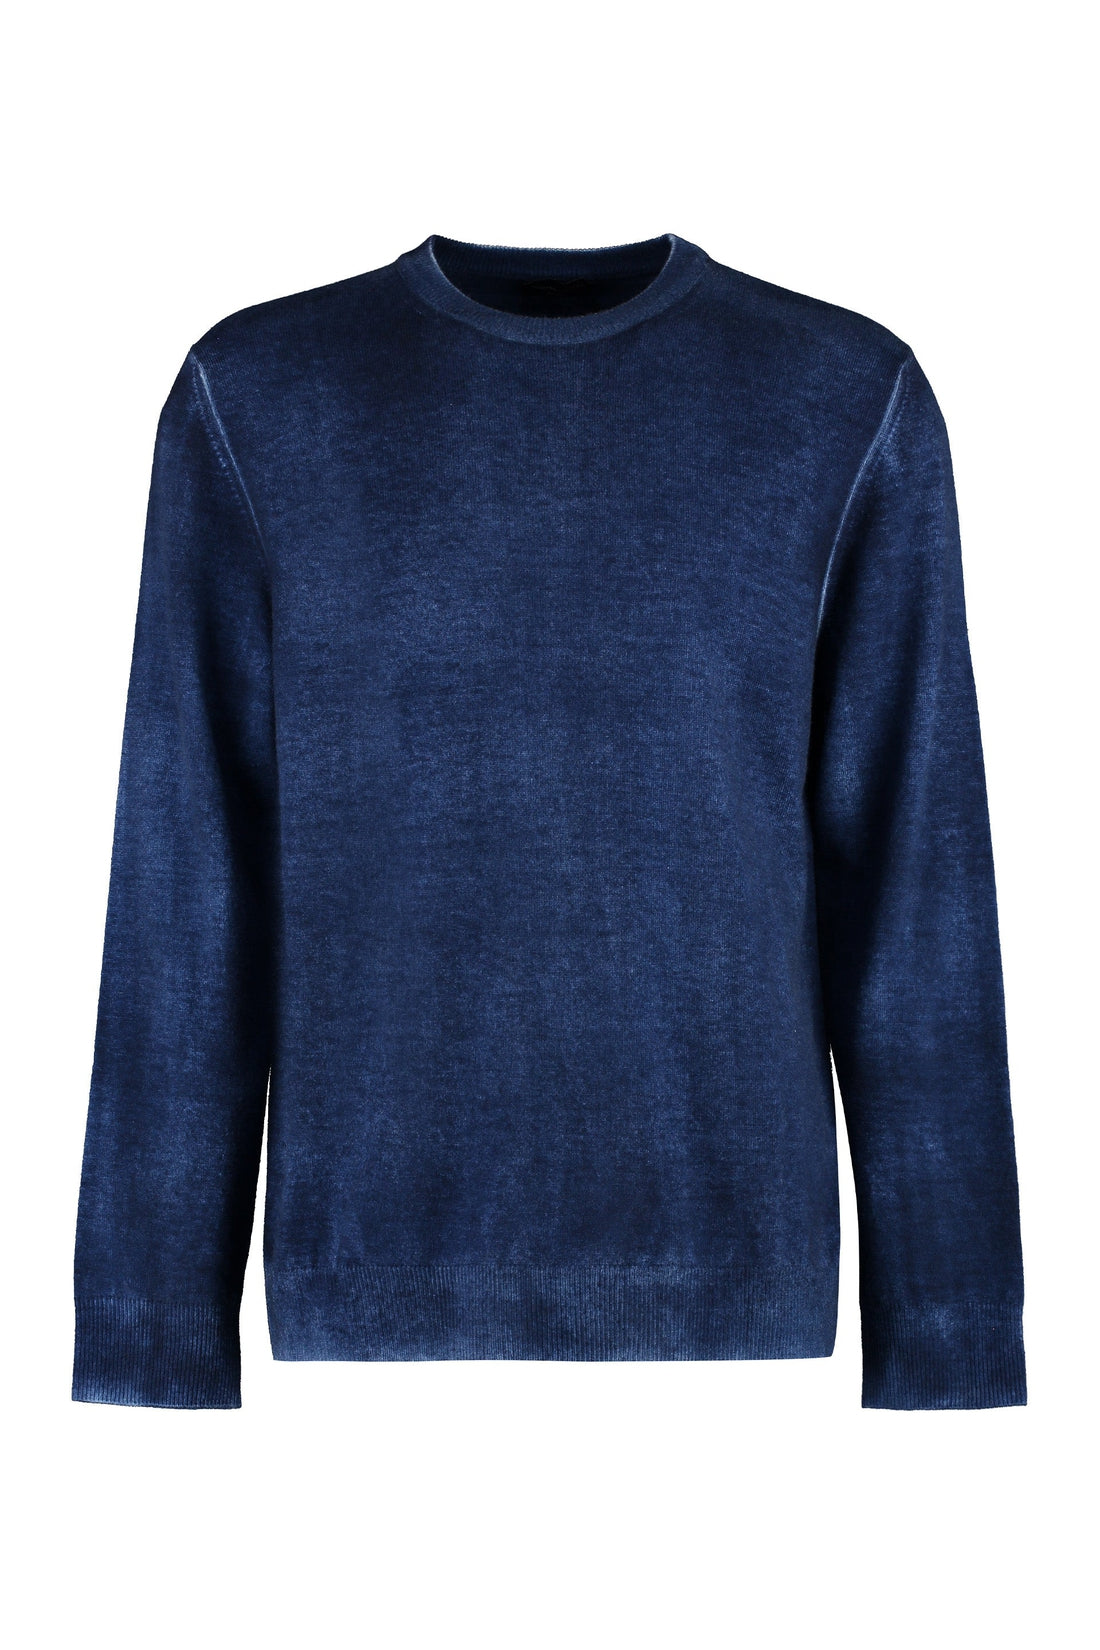 Roberto Collina-OUTLET-SALE-Wool and cashmere sweater-ARCHIVIST